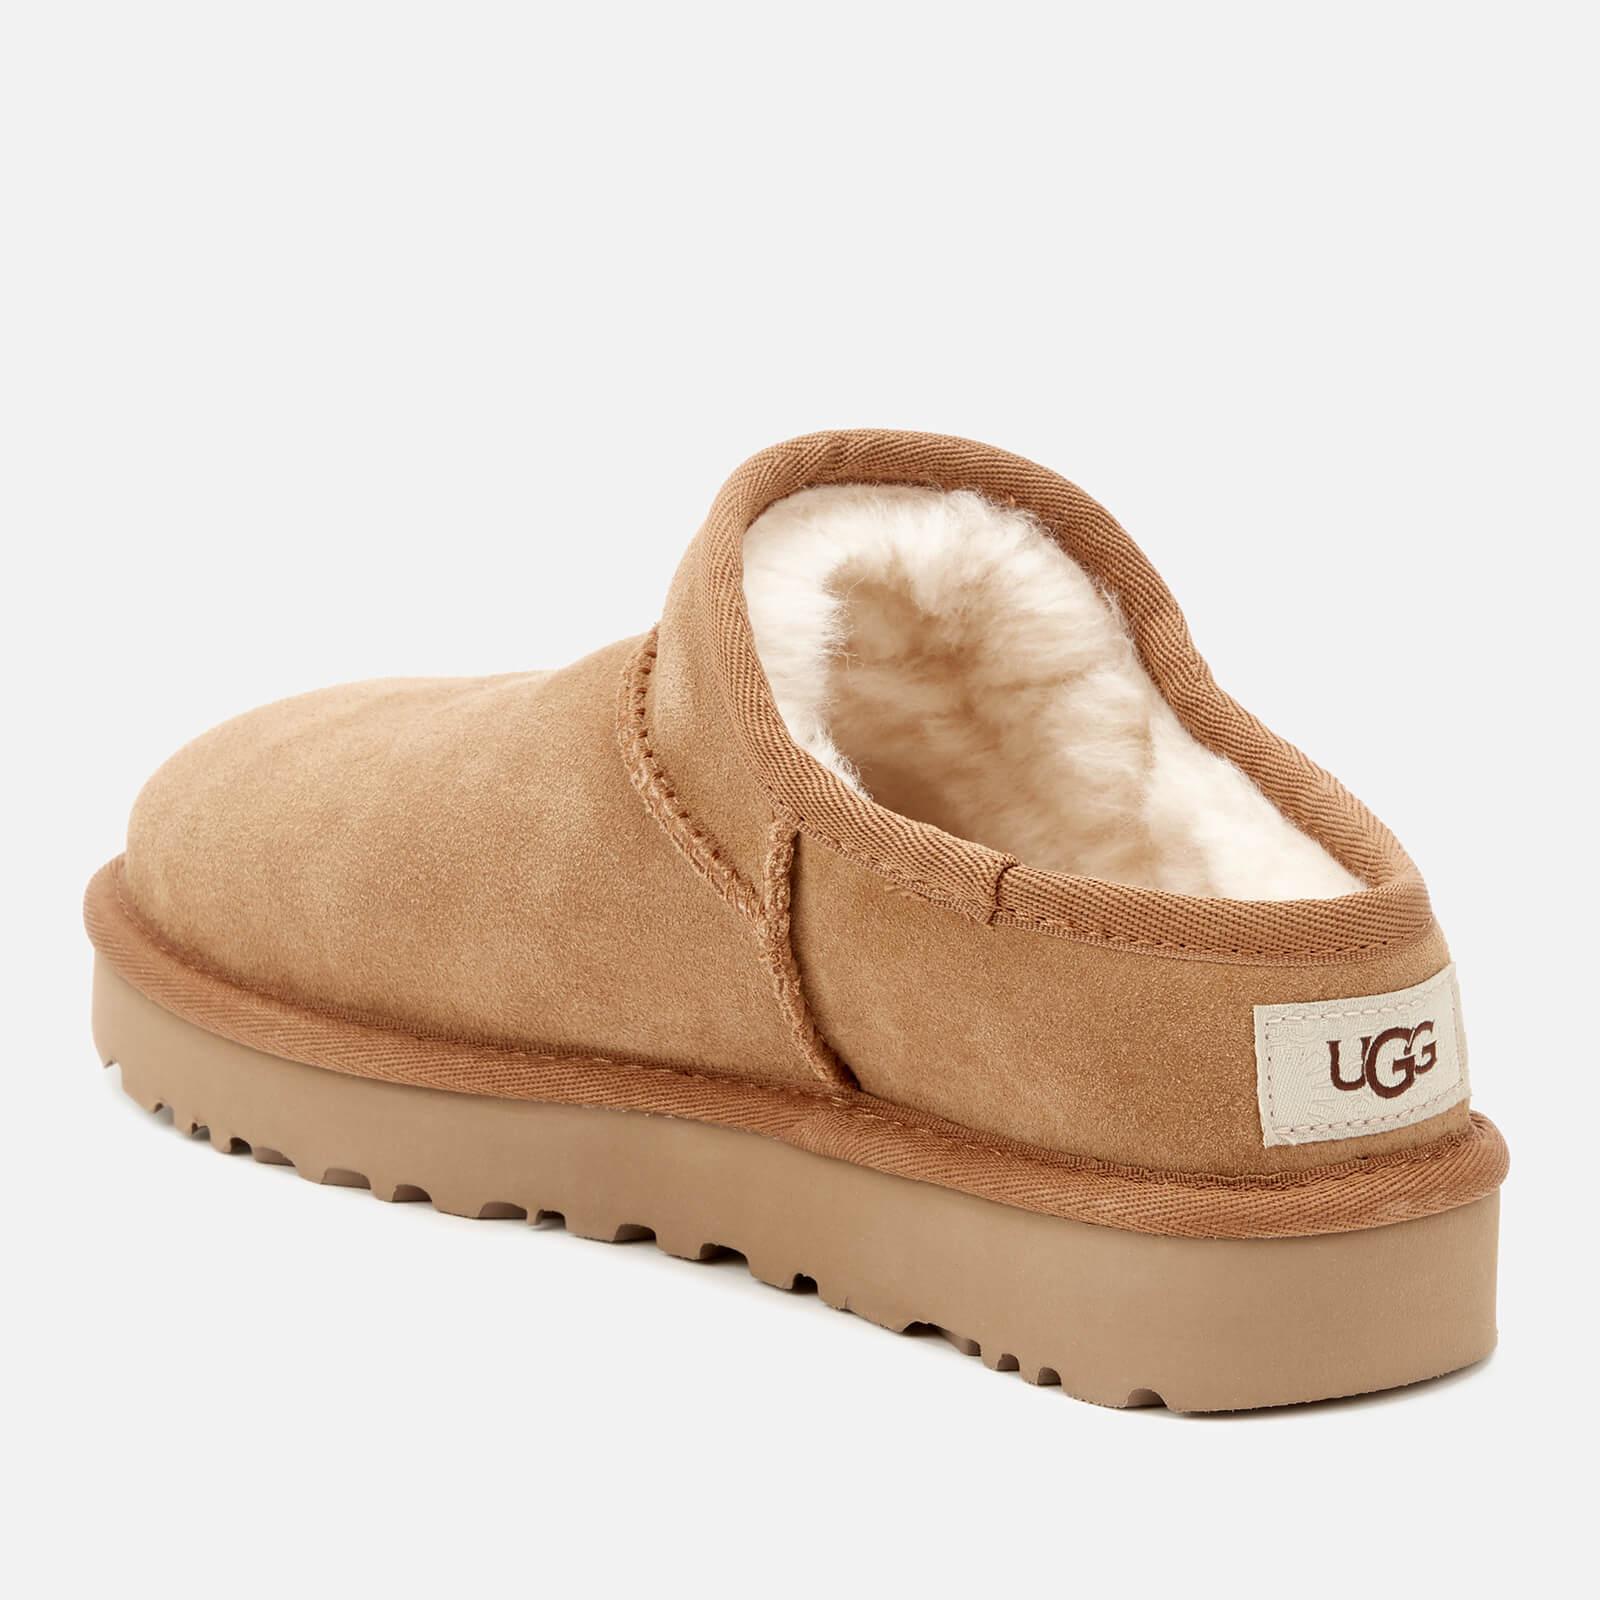 UGG Classic Slippers in Tan (Brown) - Lyst